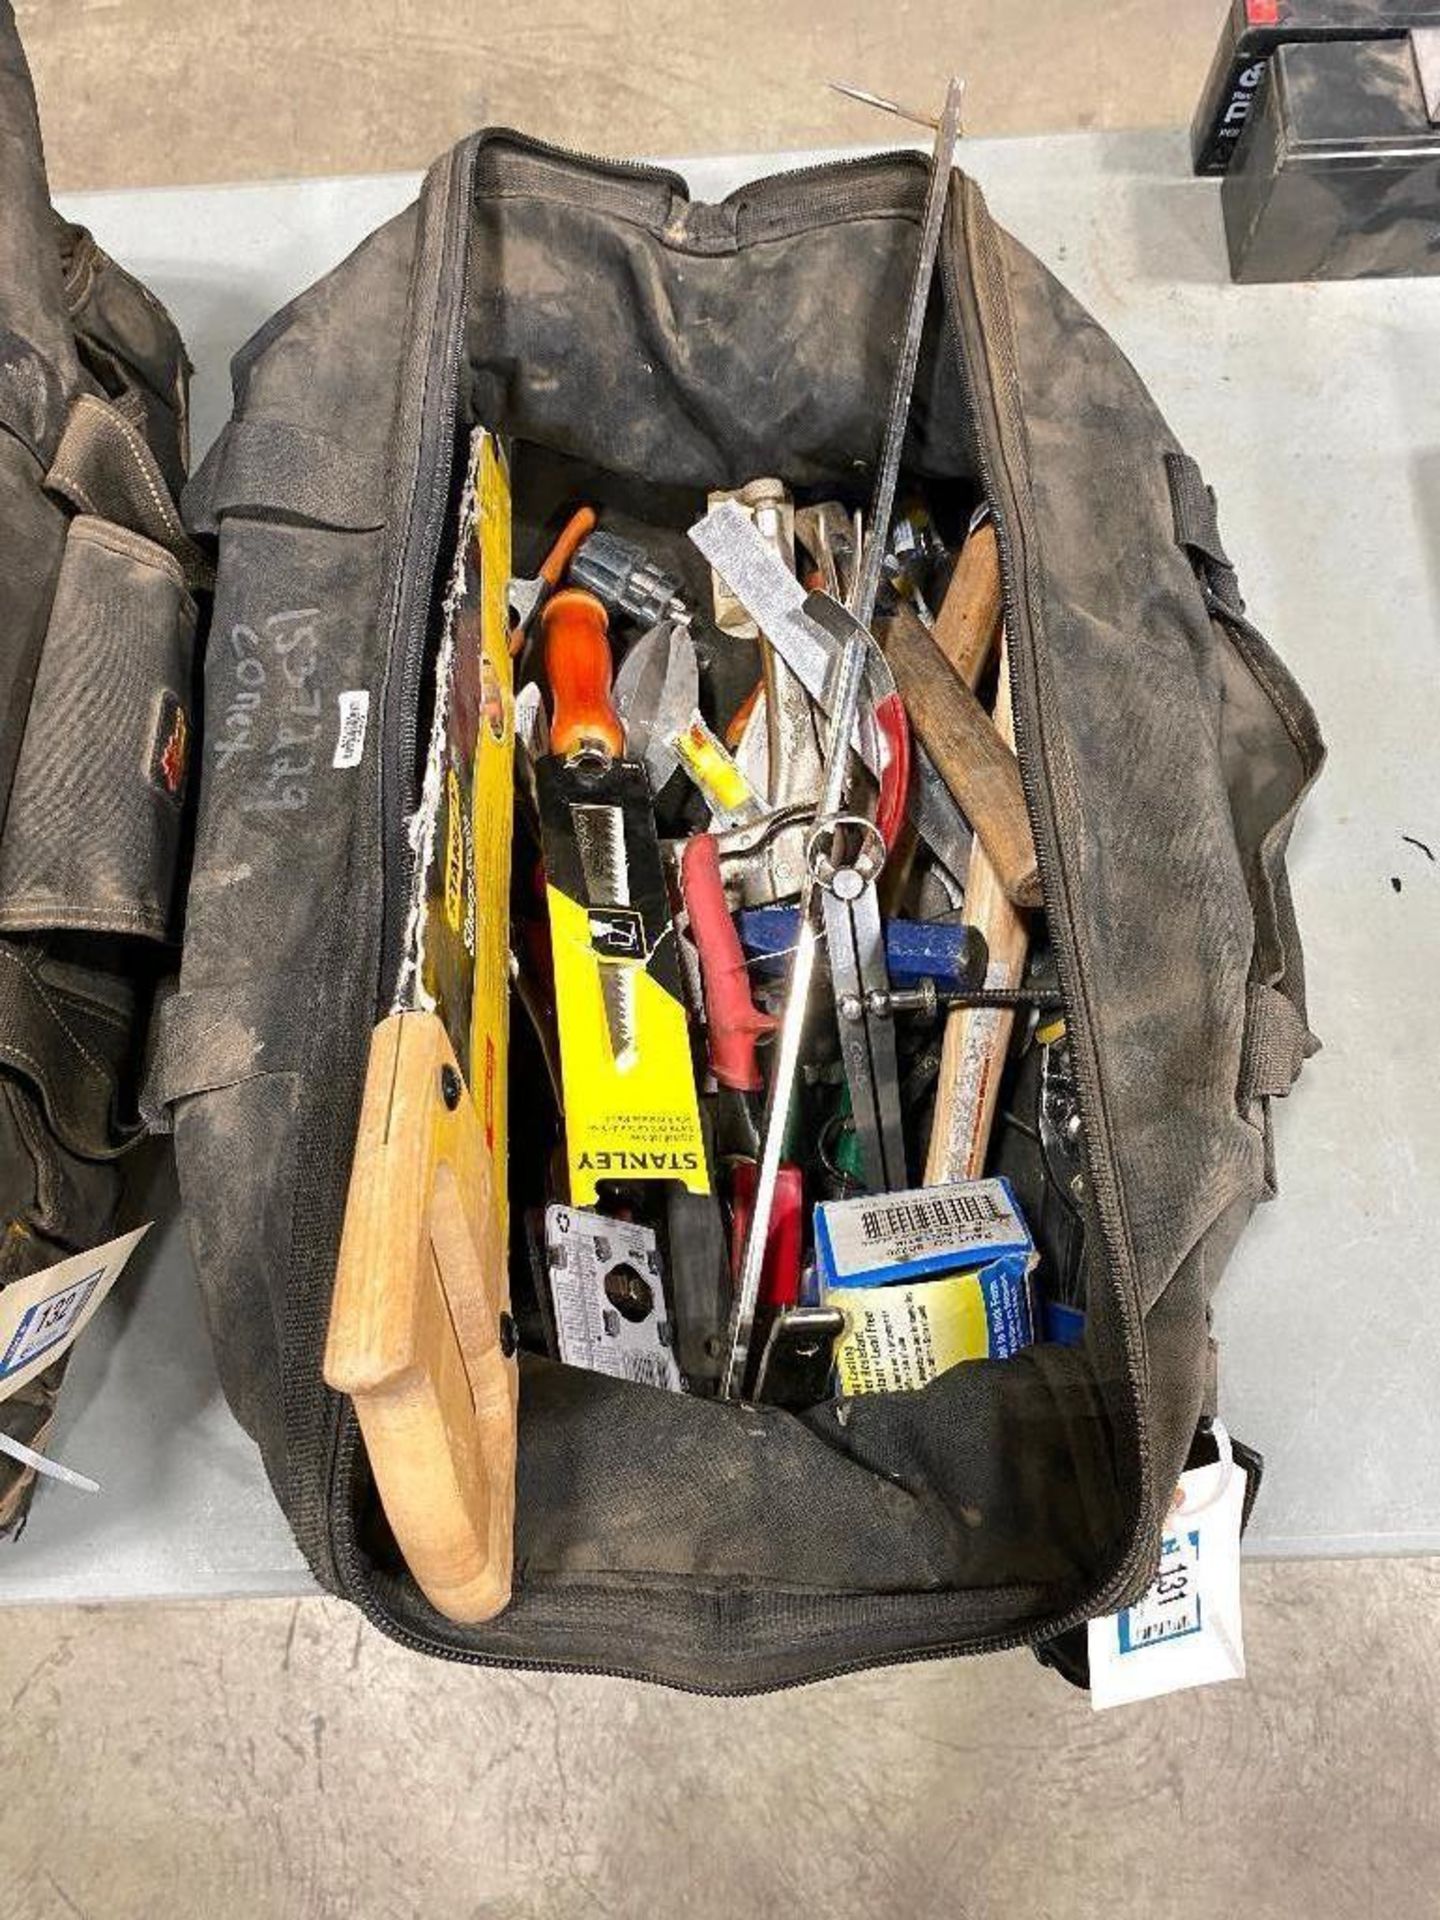 Lot of Asst. Hand Tools including Hammer, Saw, Snips, Vise Grips, Clamps, etc. - Image 2 of 6